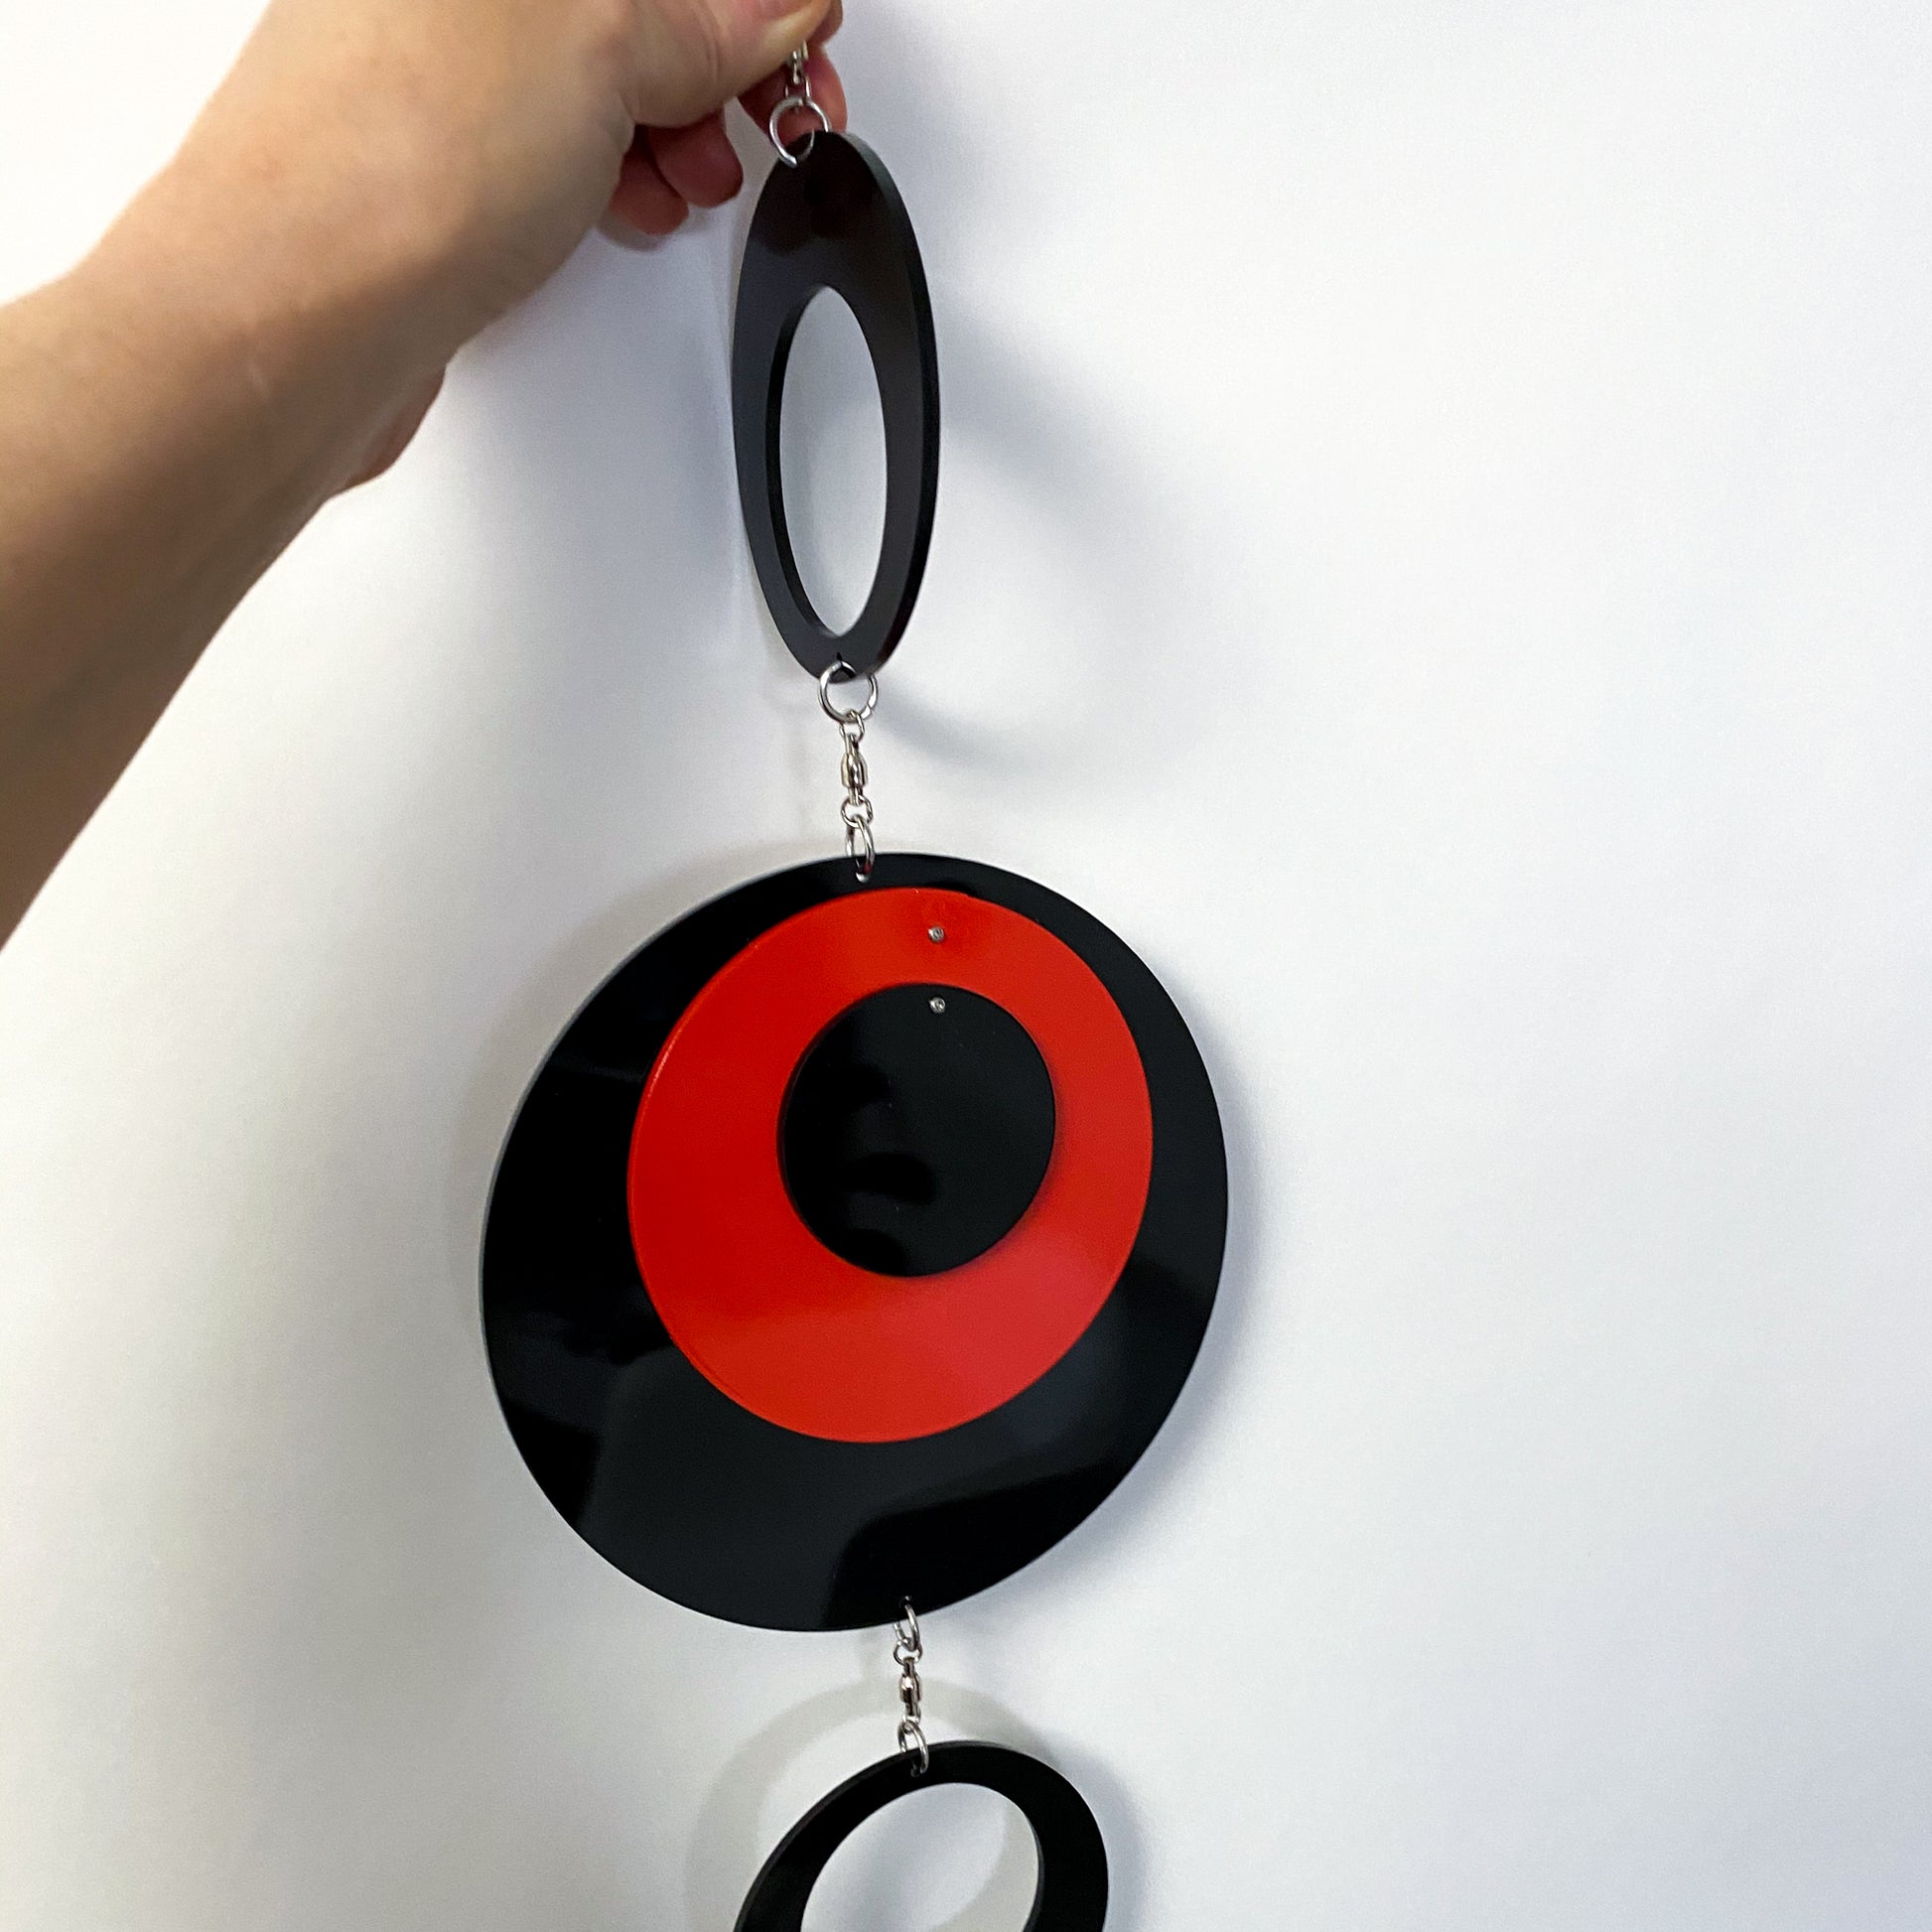 Holding the POPdots in black and red closeup - wall art mobiles by atomicmobiles.com